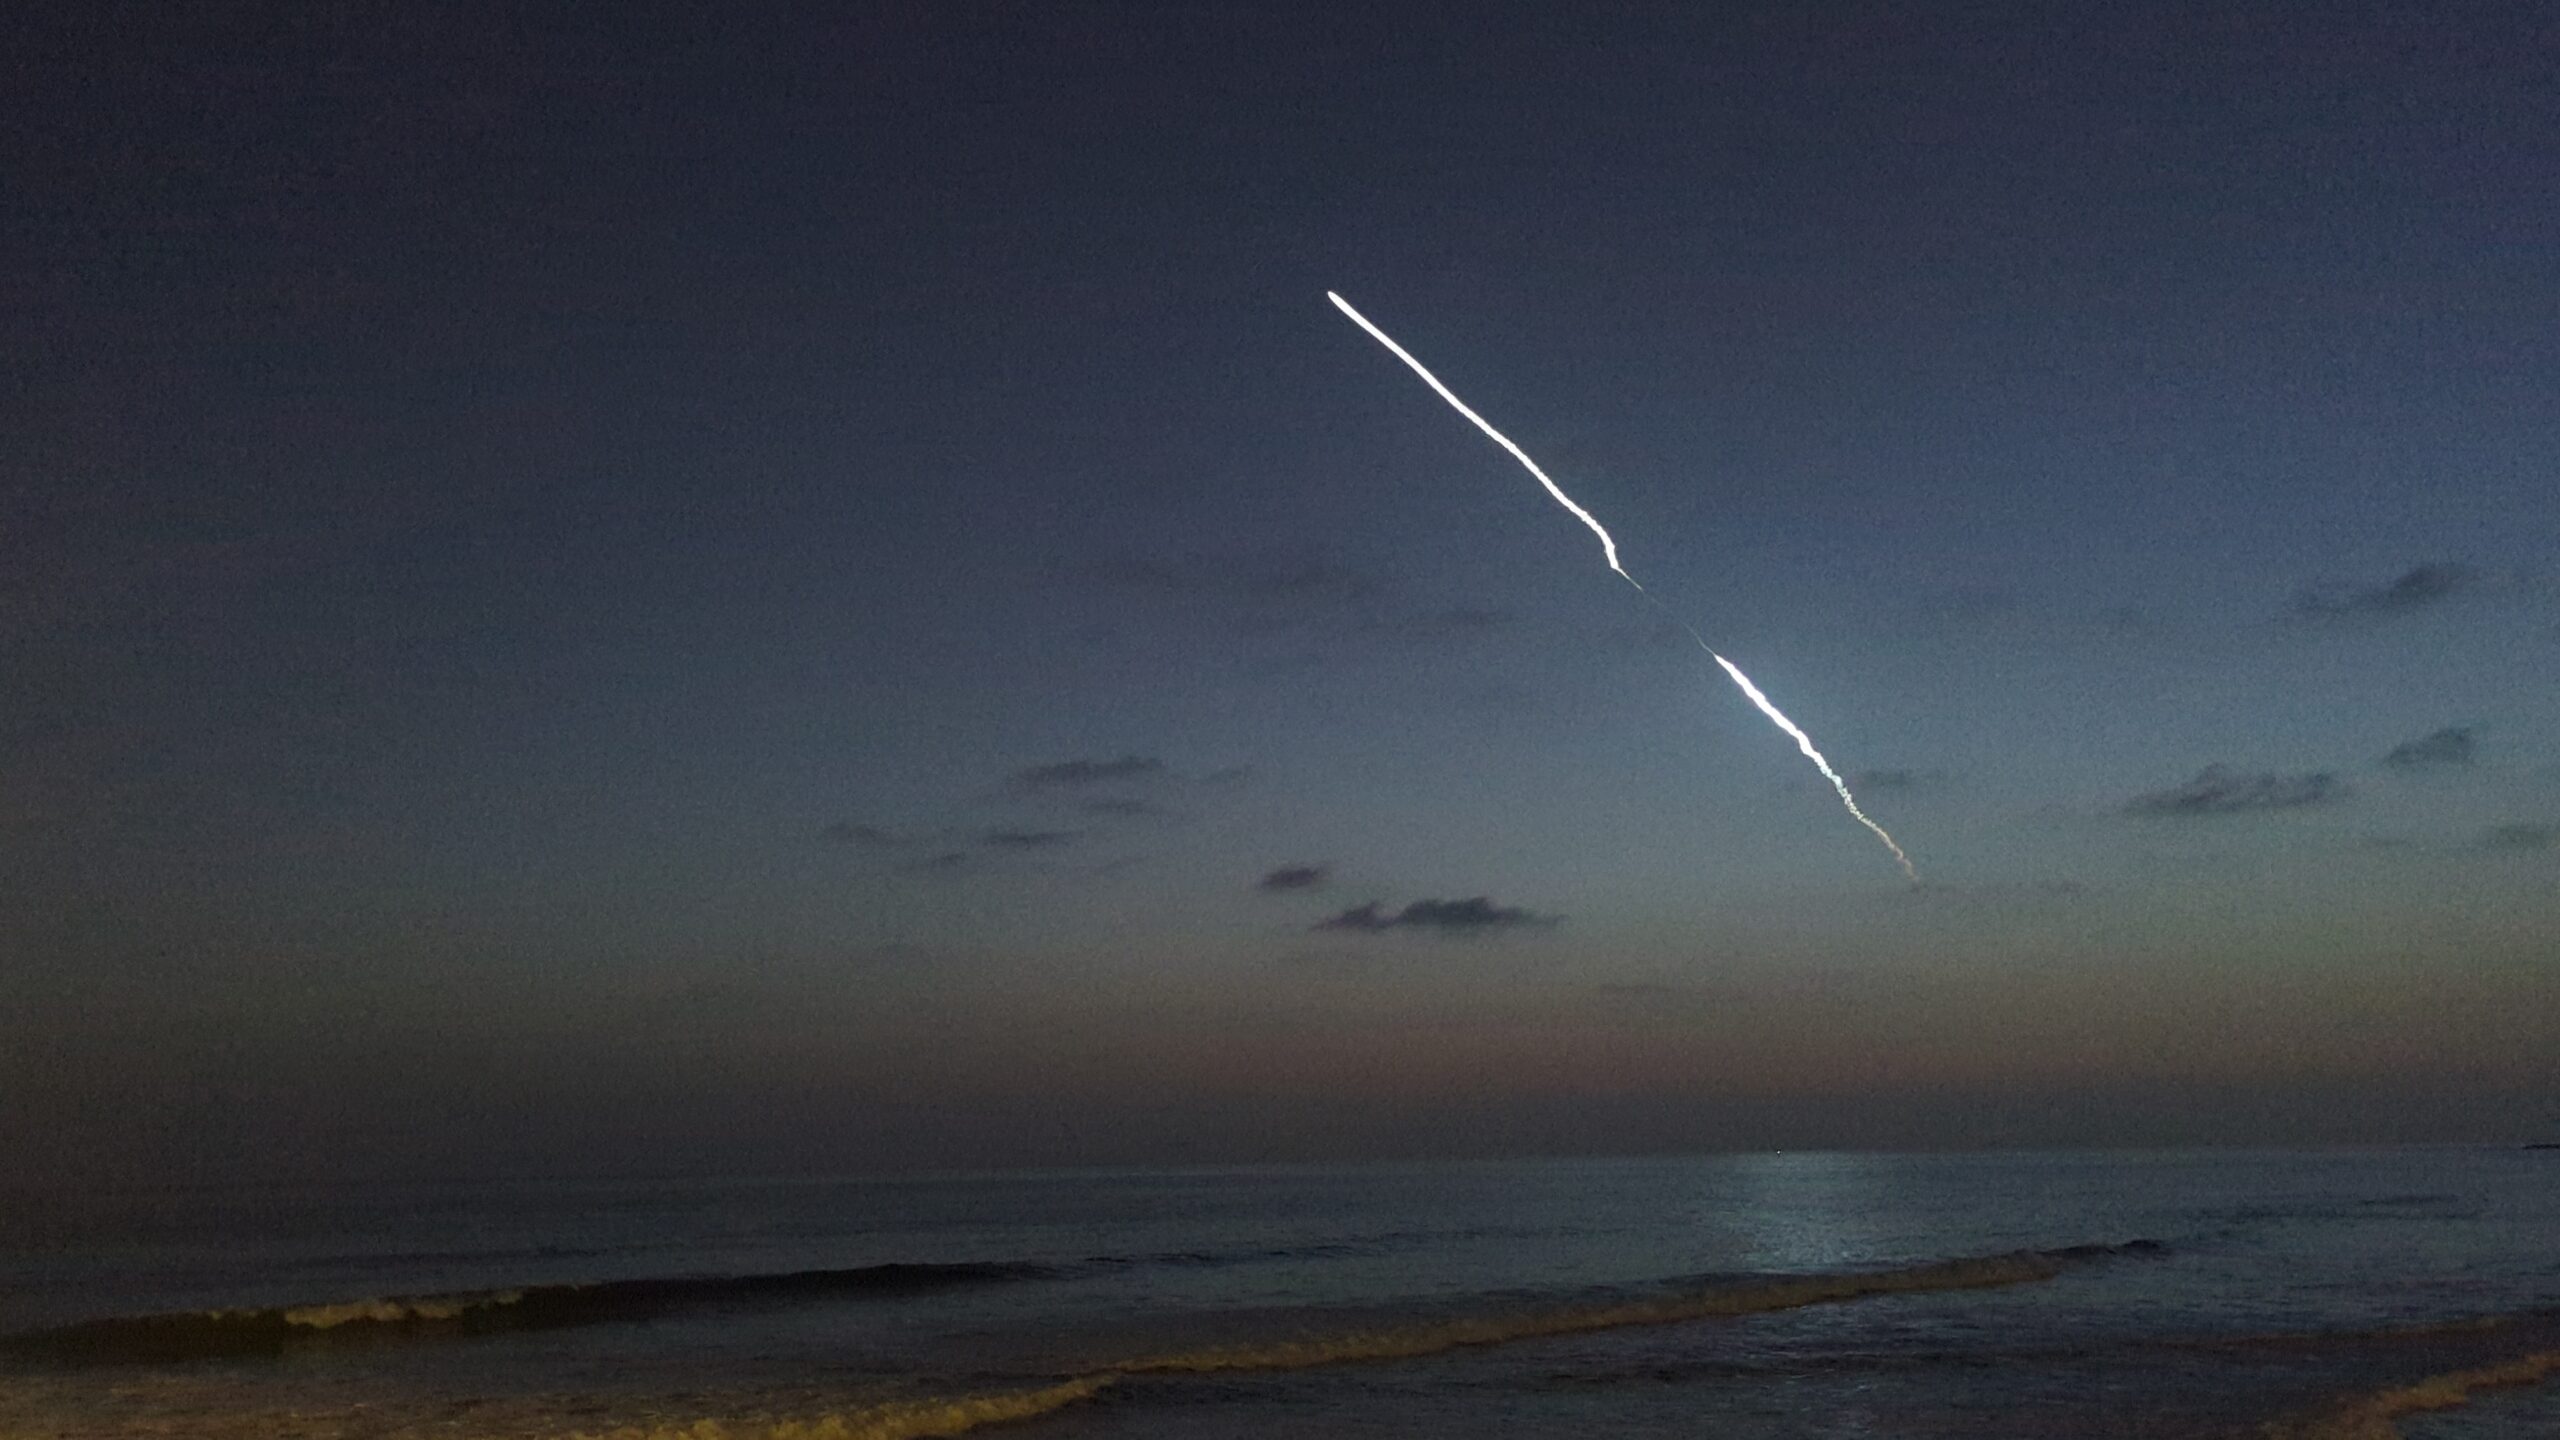 A photograph of a SpaceX Falcon 9 launching over the Pacific Ocean